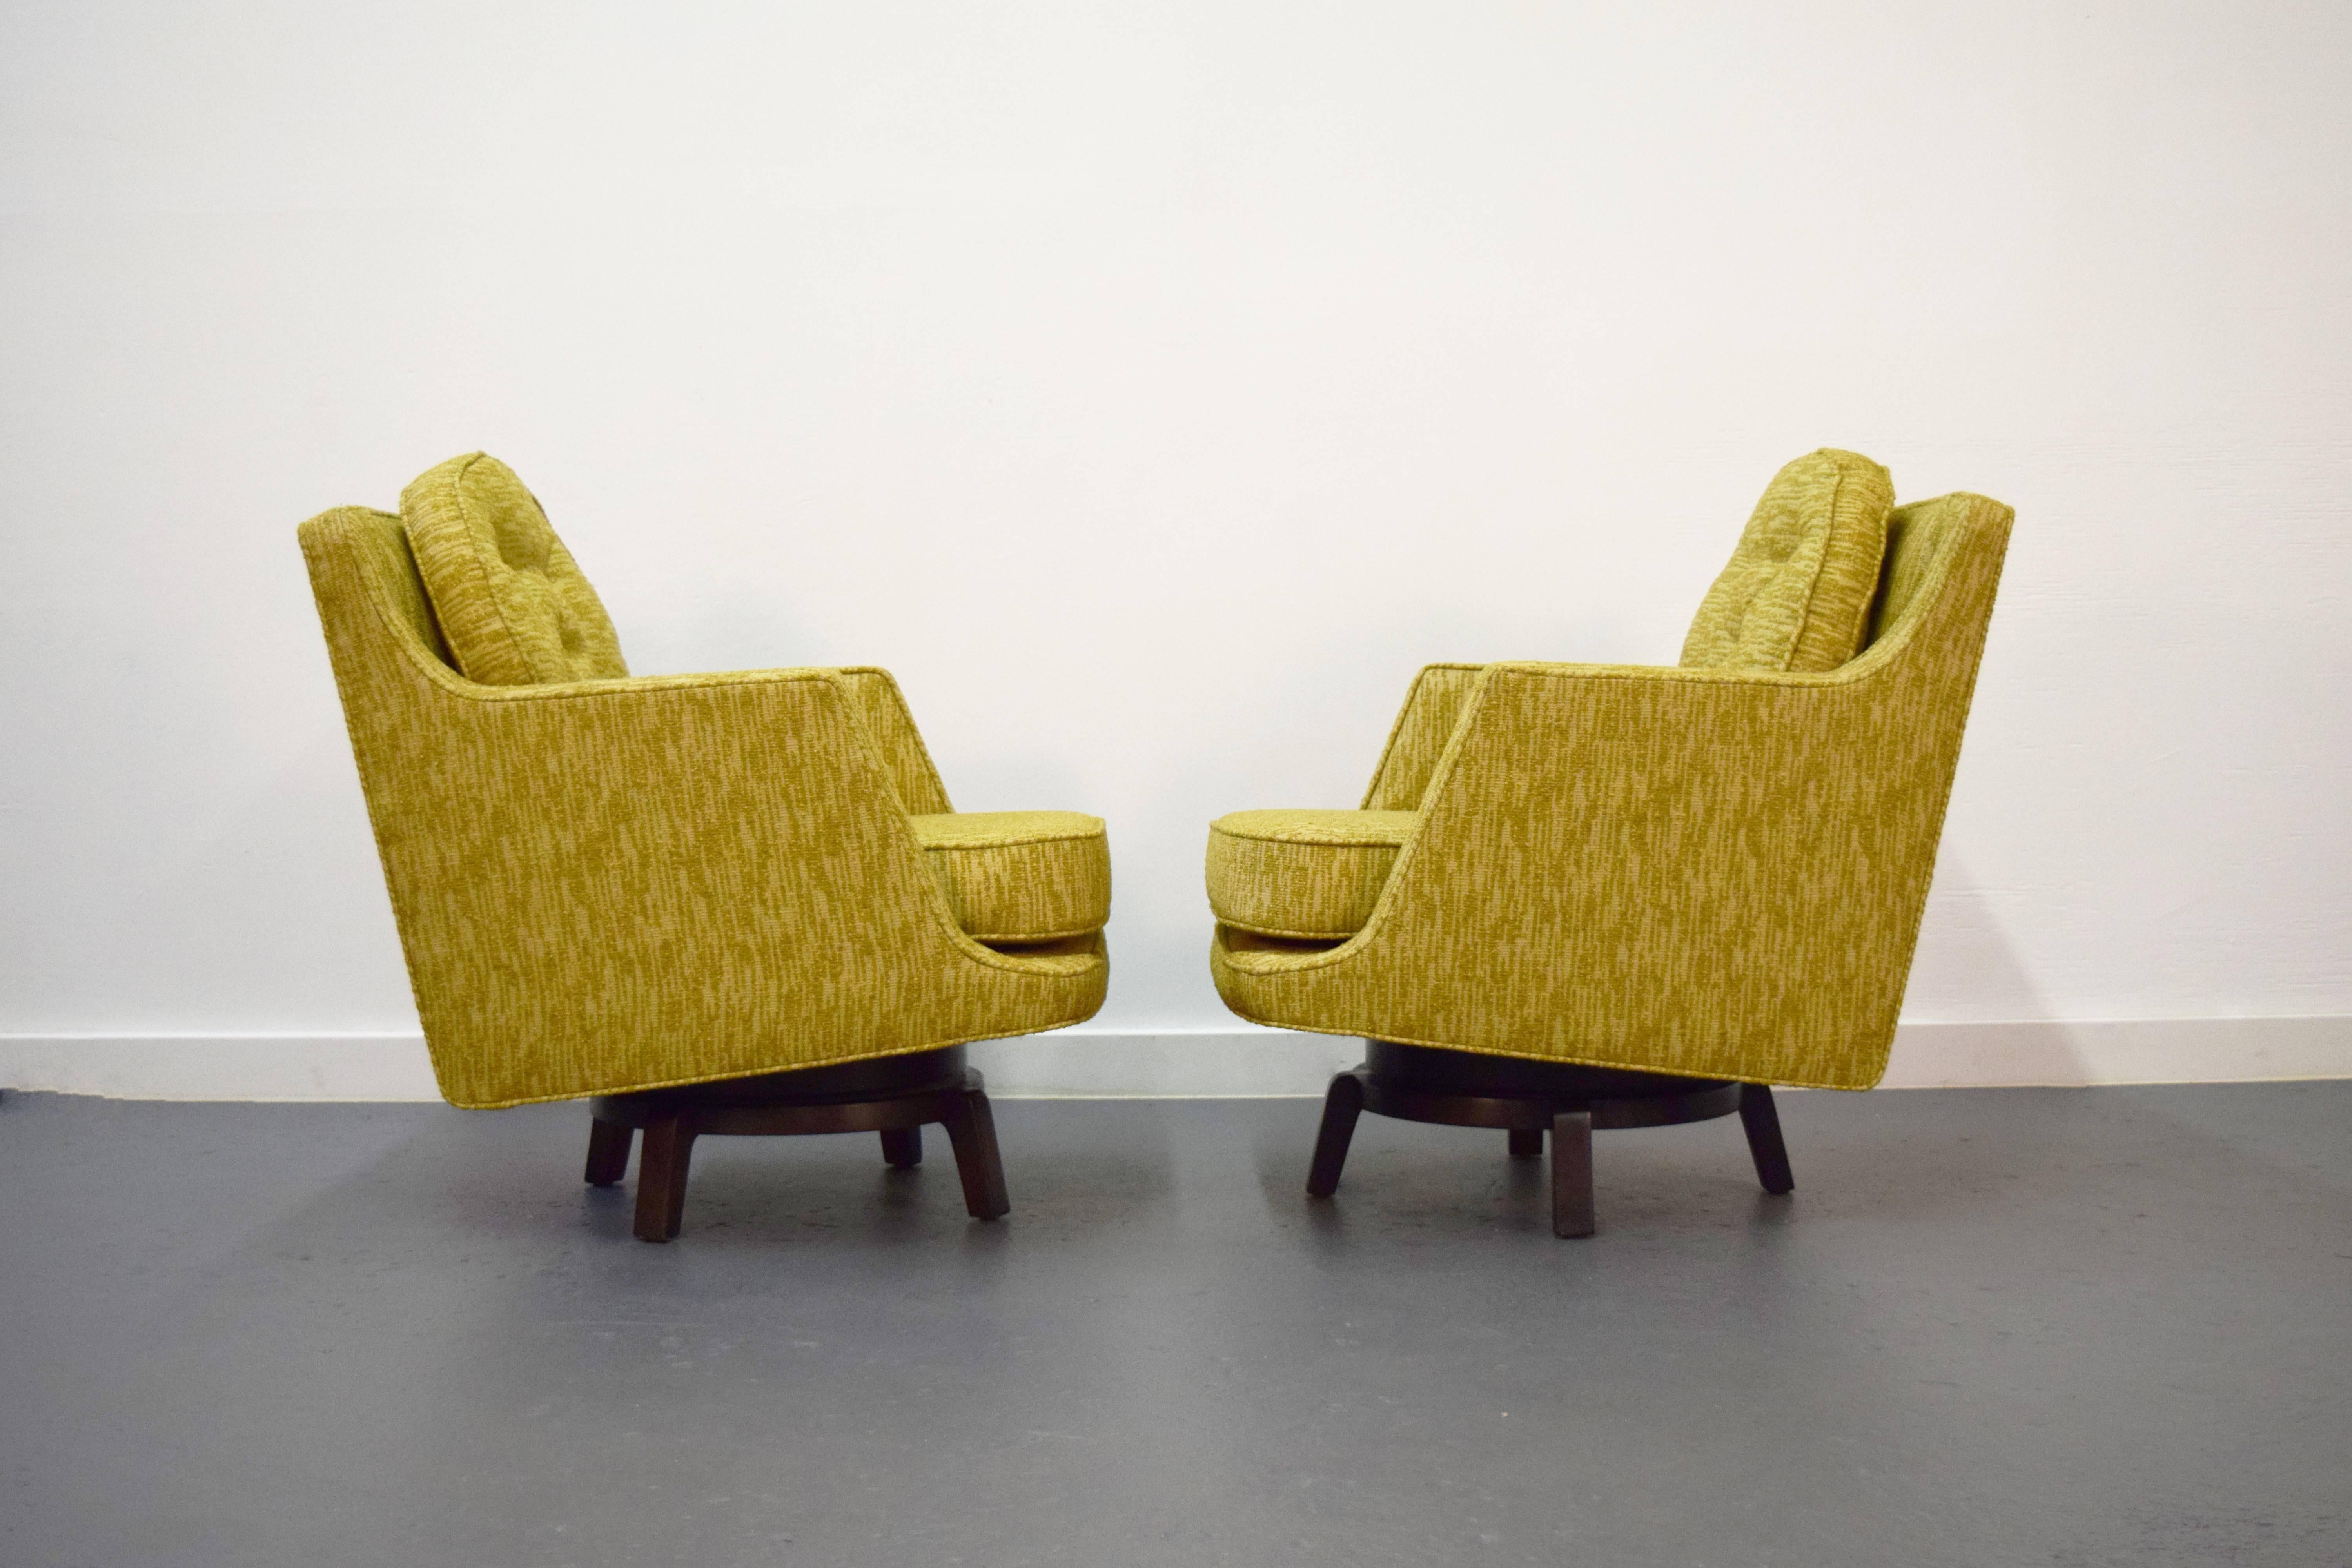 American Pair of Edward Wormley Swivel Lounge Chairs for Dunbar